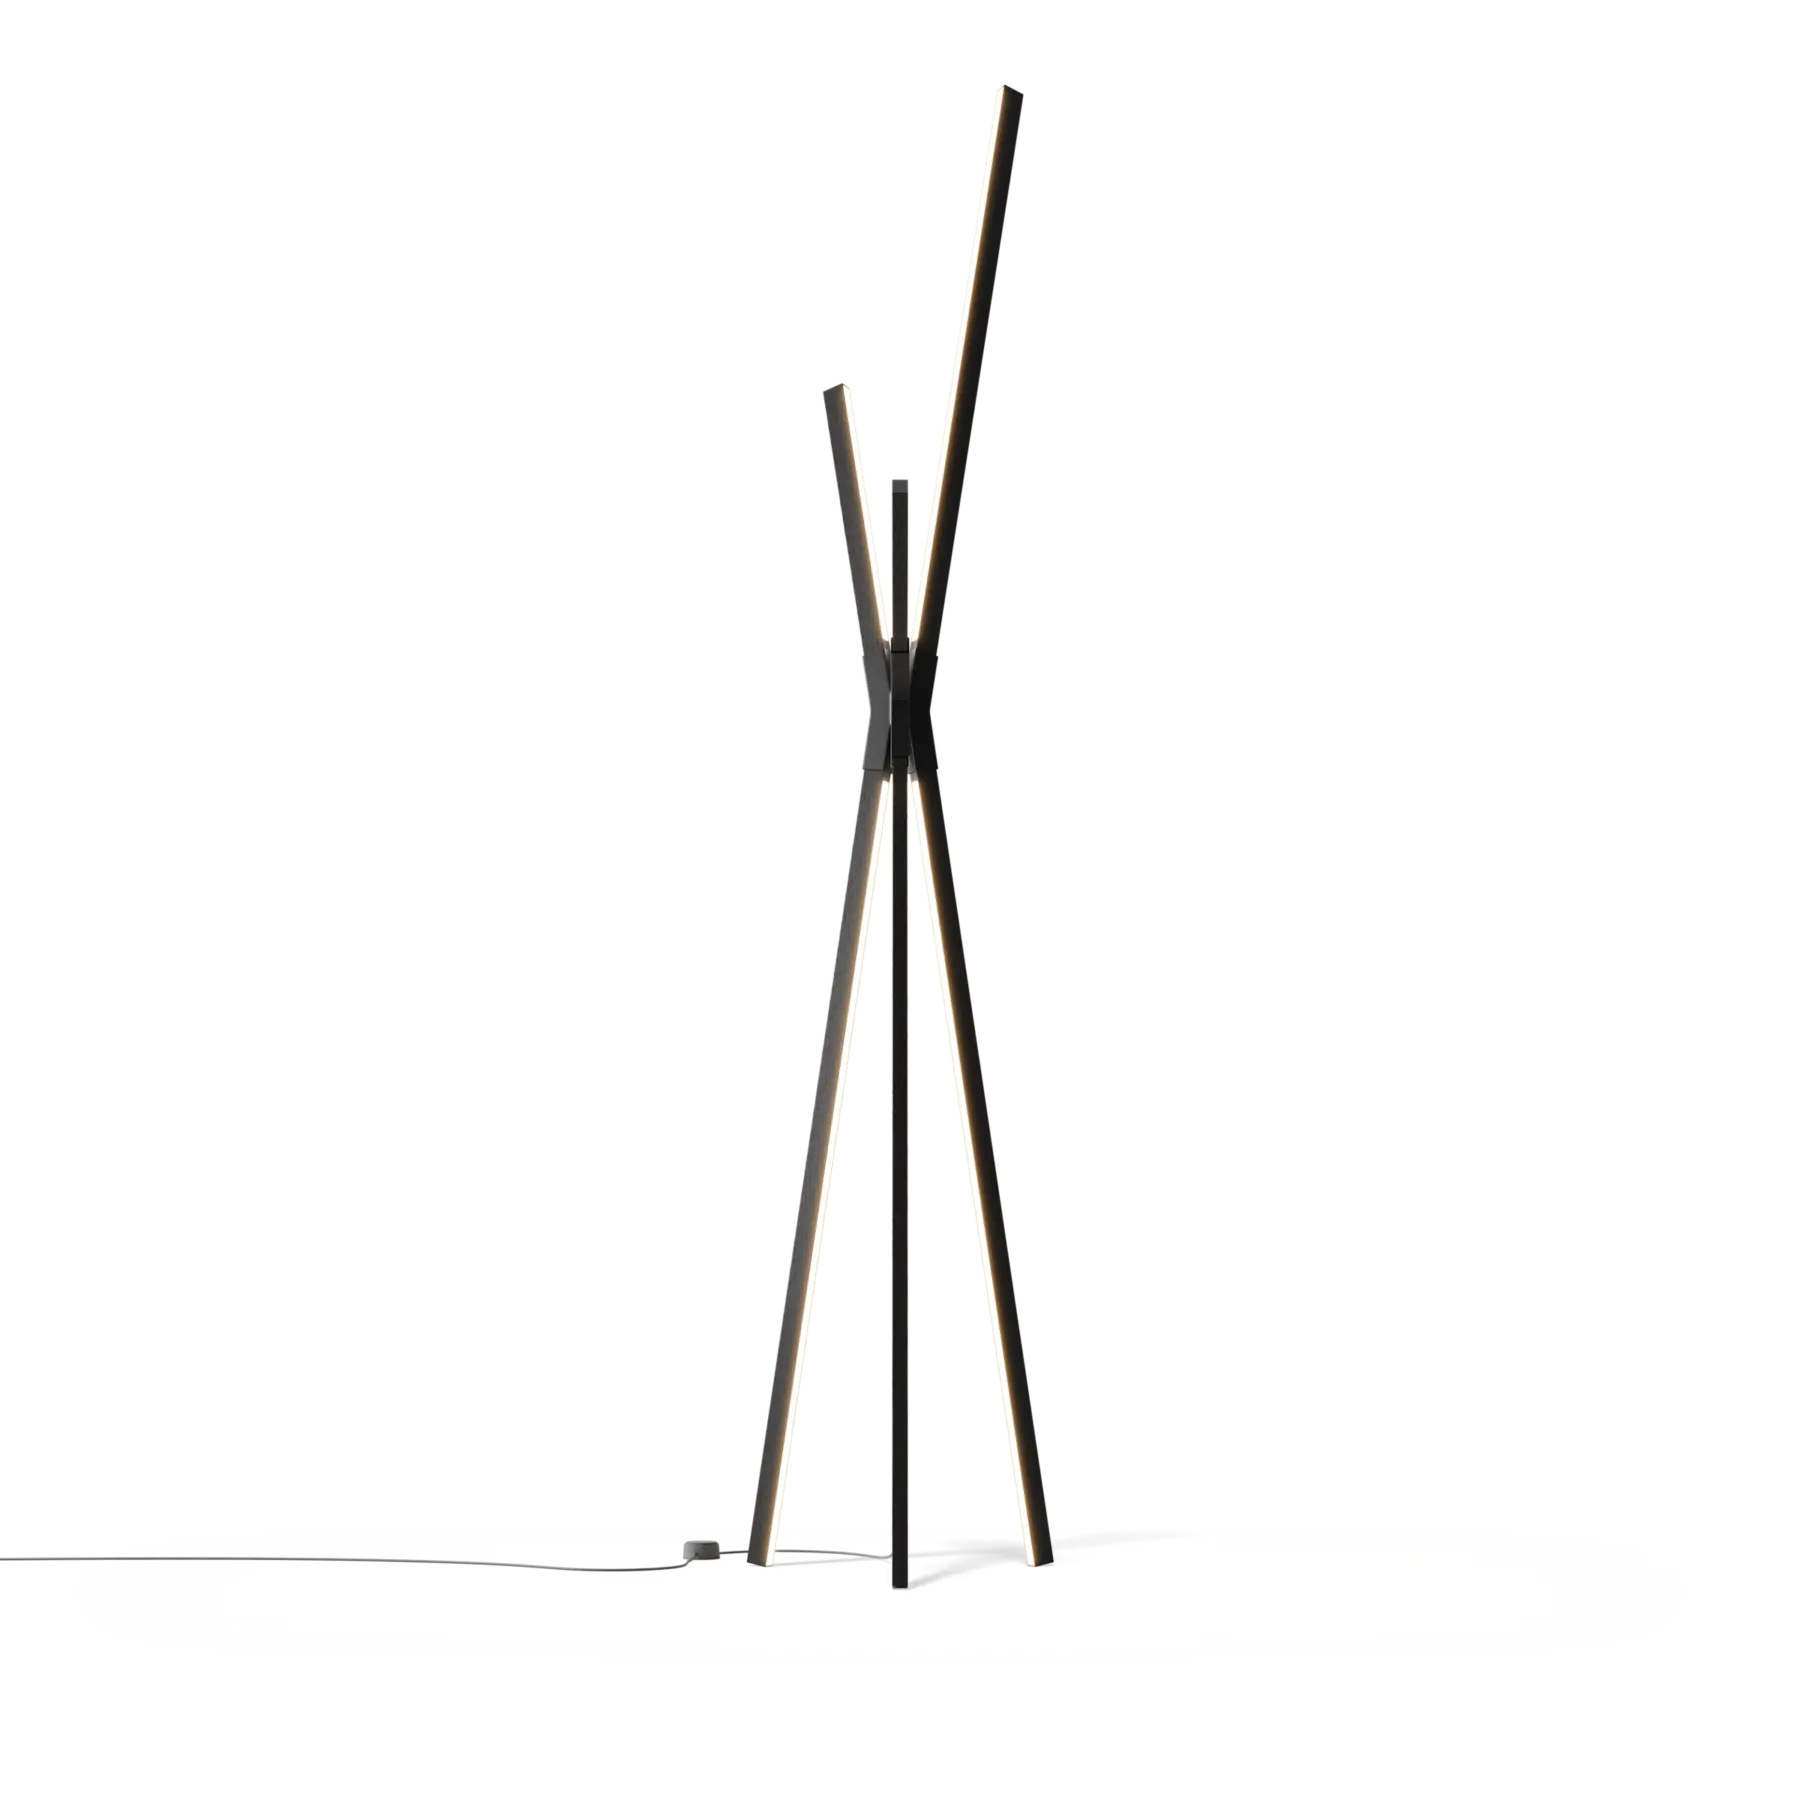 Image of a Stickbulb Floor Bang lighting fixture. The modern fixture consists of sleek wooden beams with multiple integrated LED bulbs.